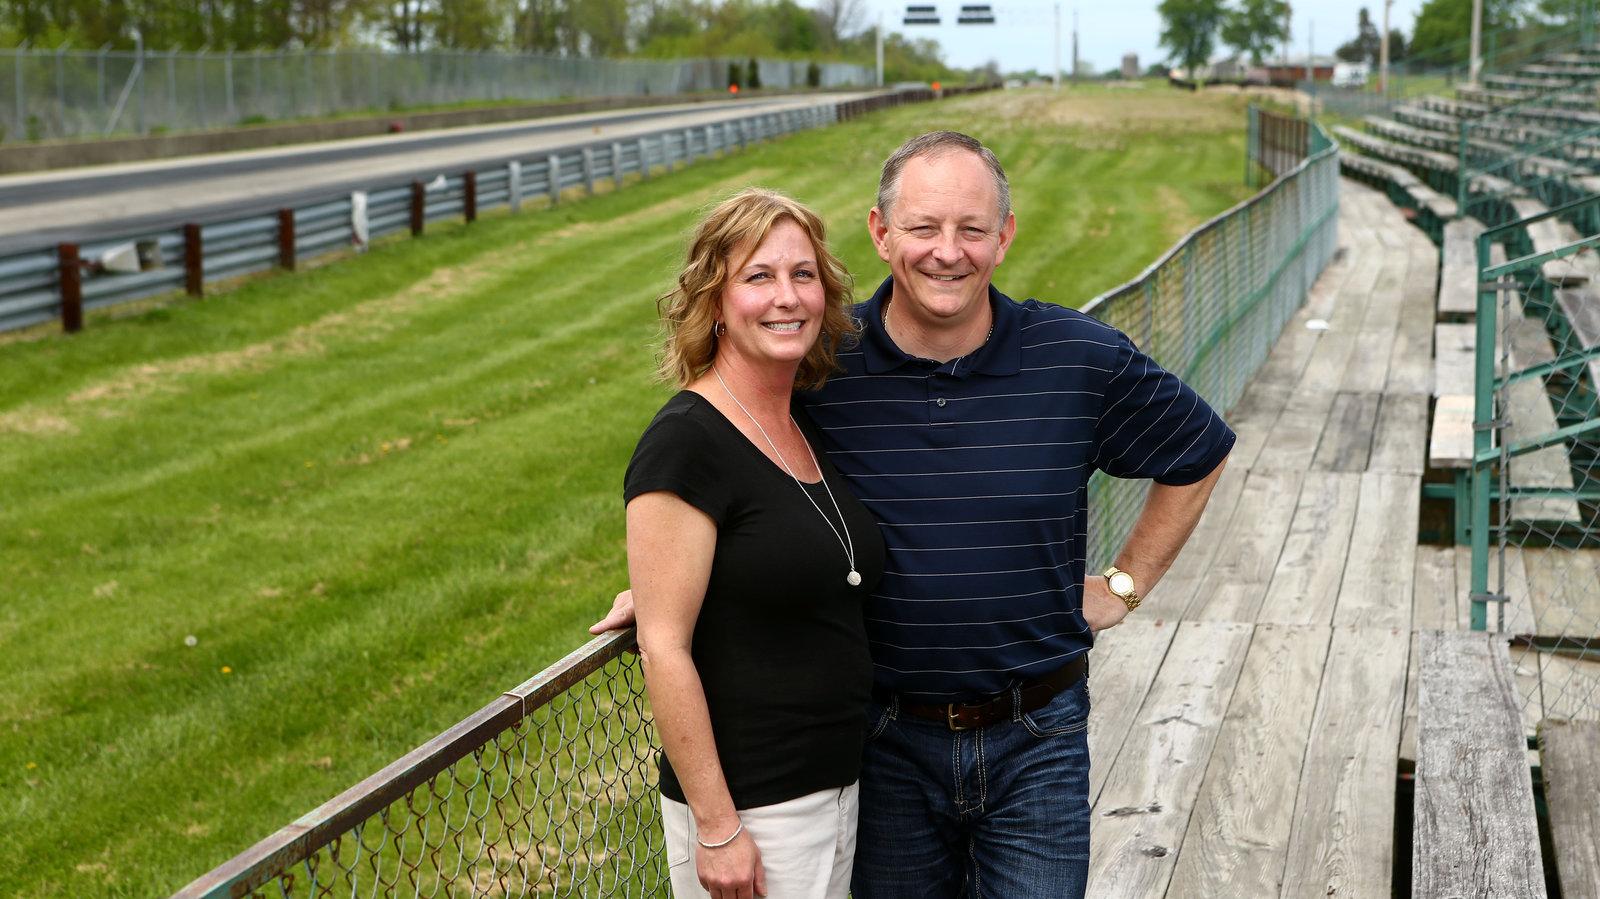 A Hoosier Revives His Hometown Dragstrip   The New York Times